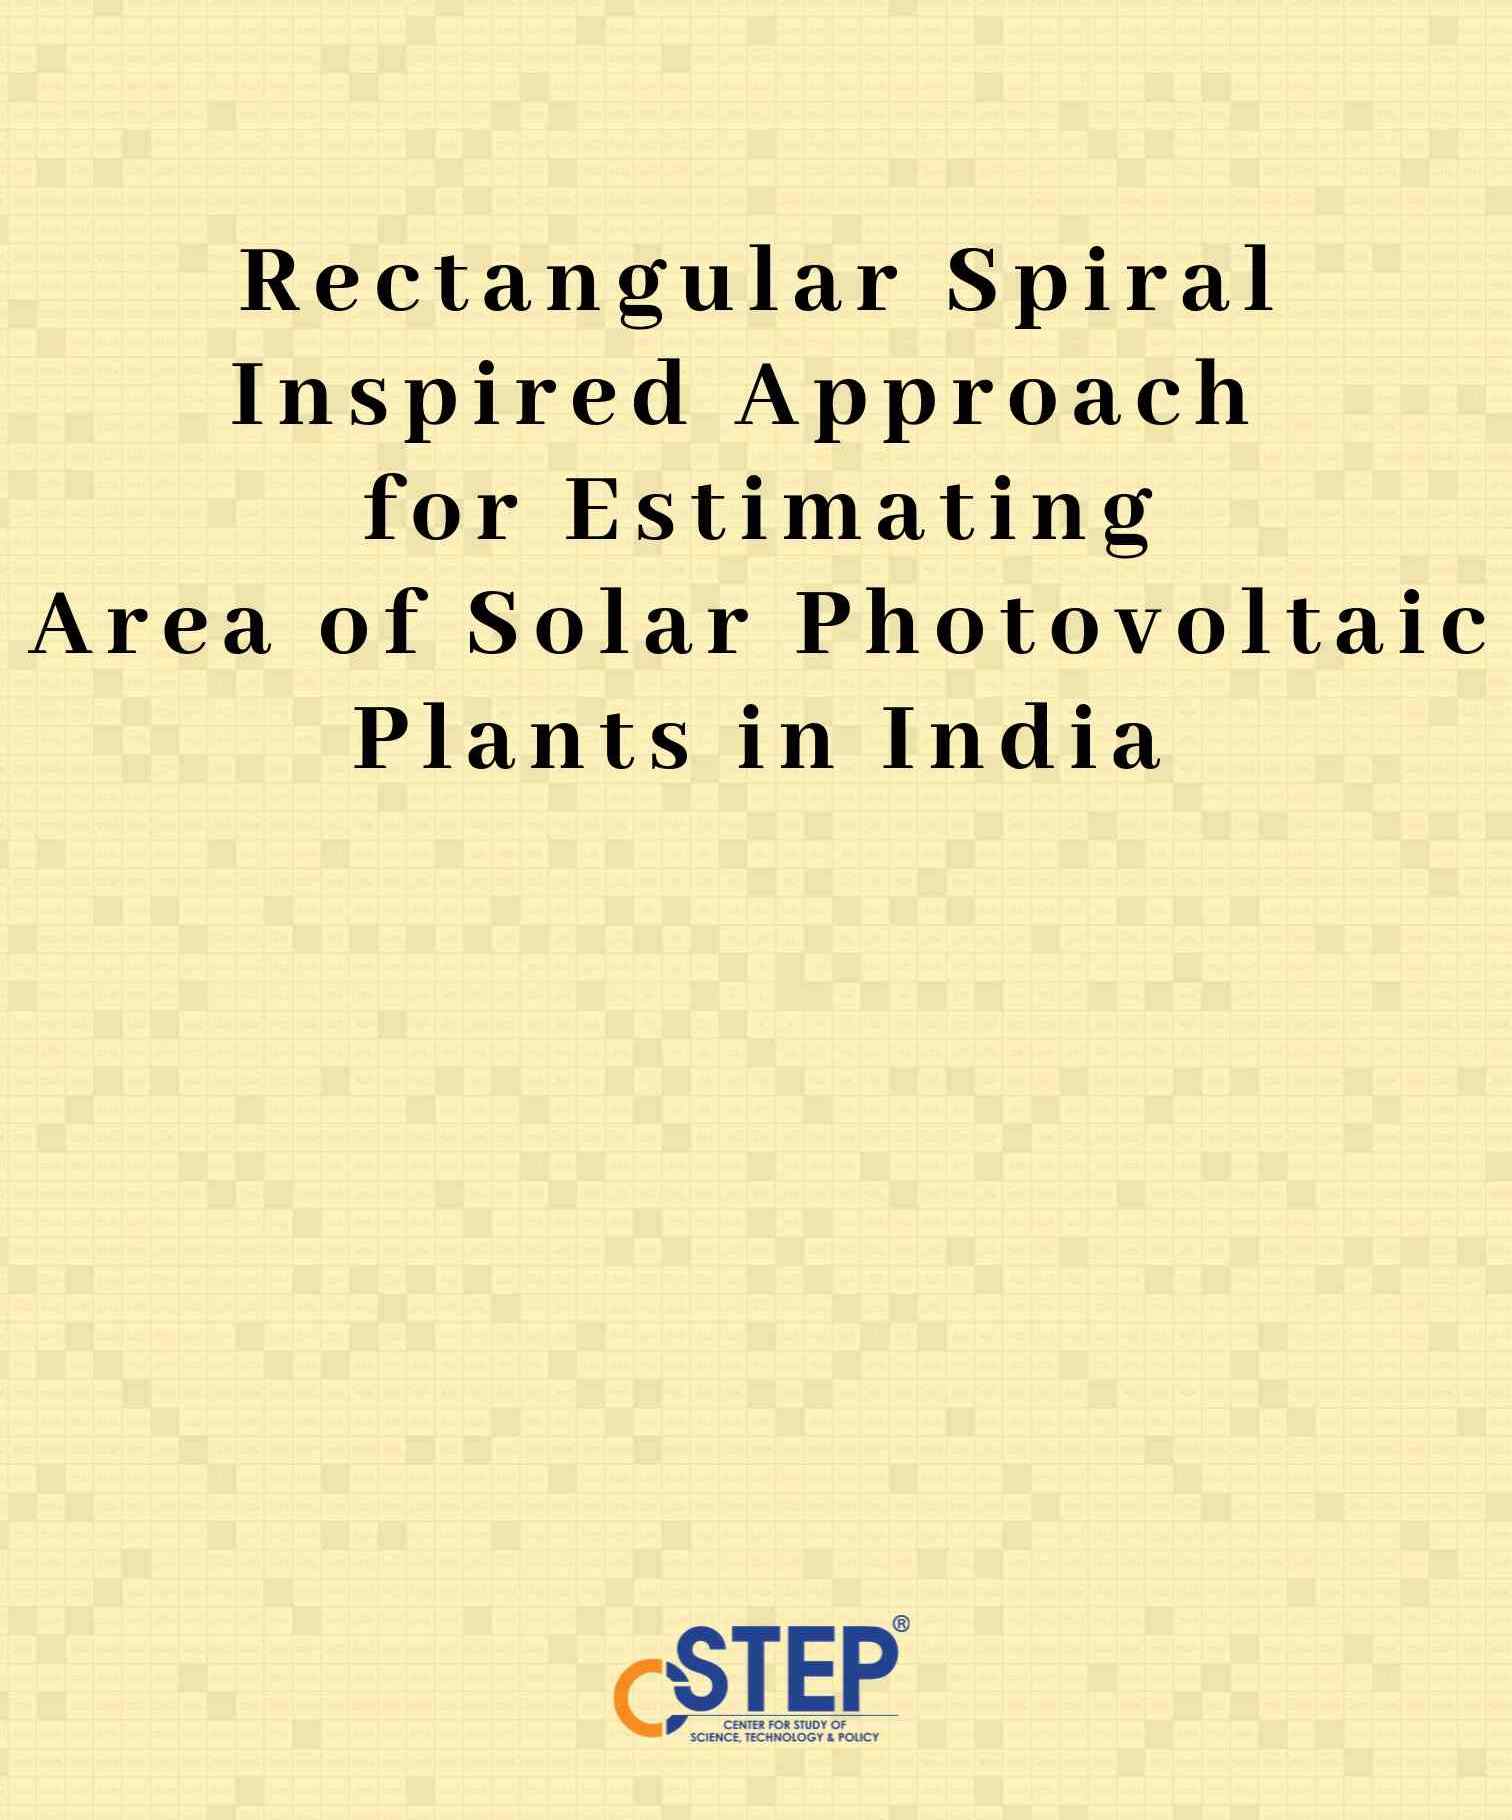 Rectangular Spiral Inspired Approach for Estimating Area of Solar Photovoltaic Plants in India